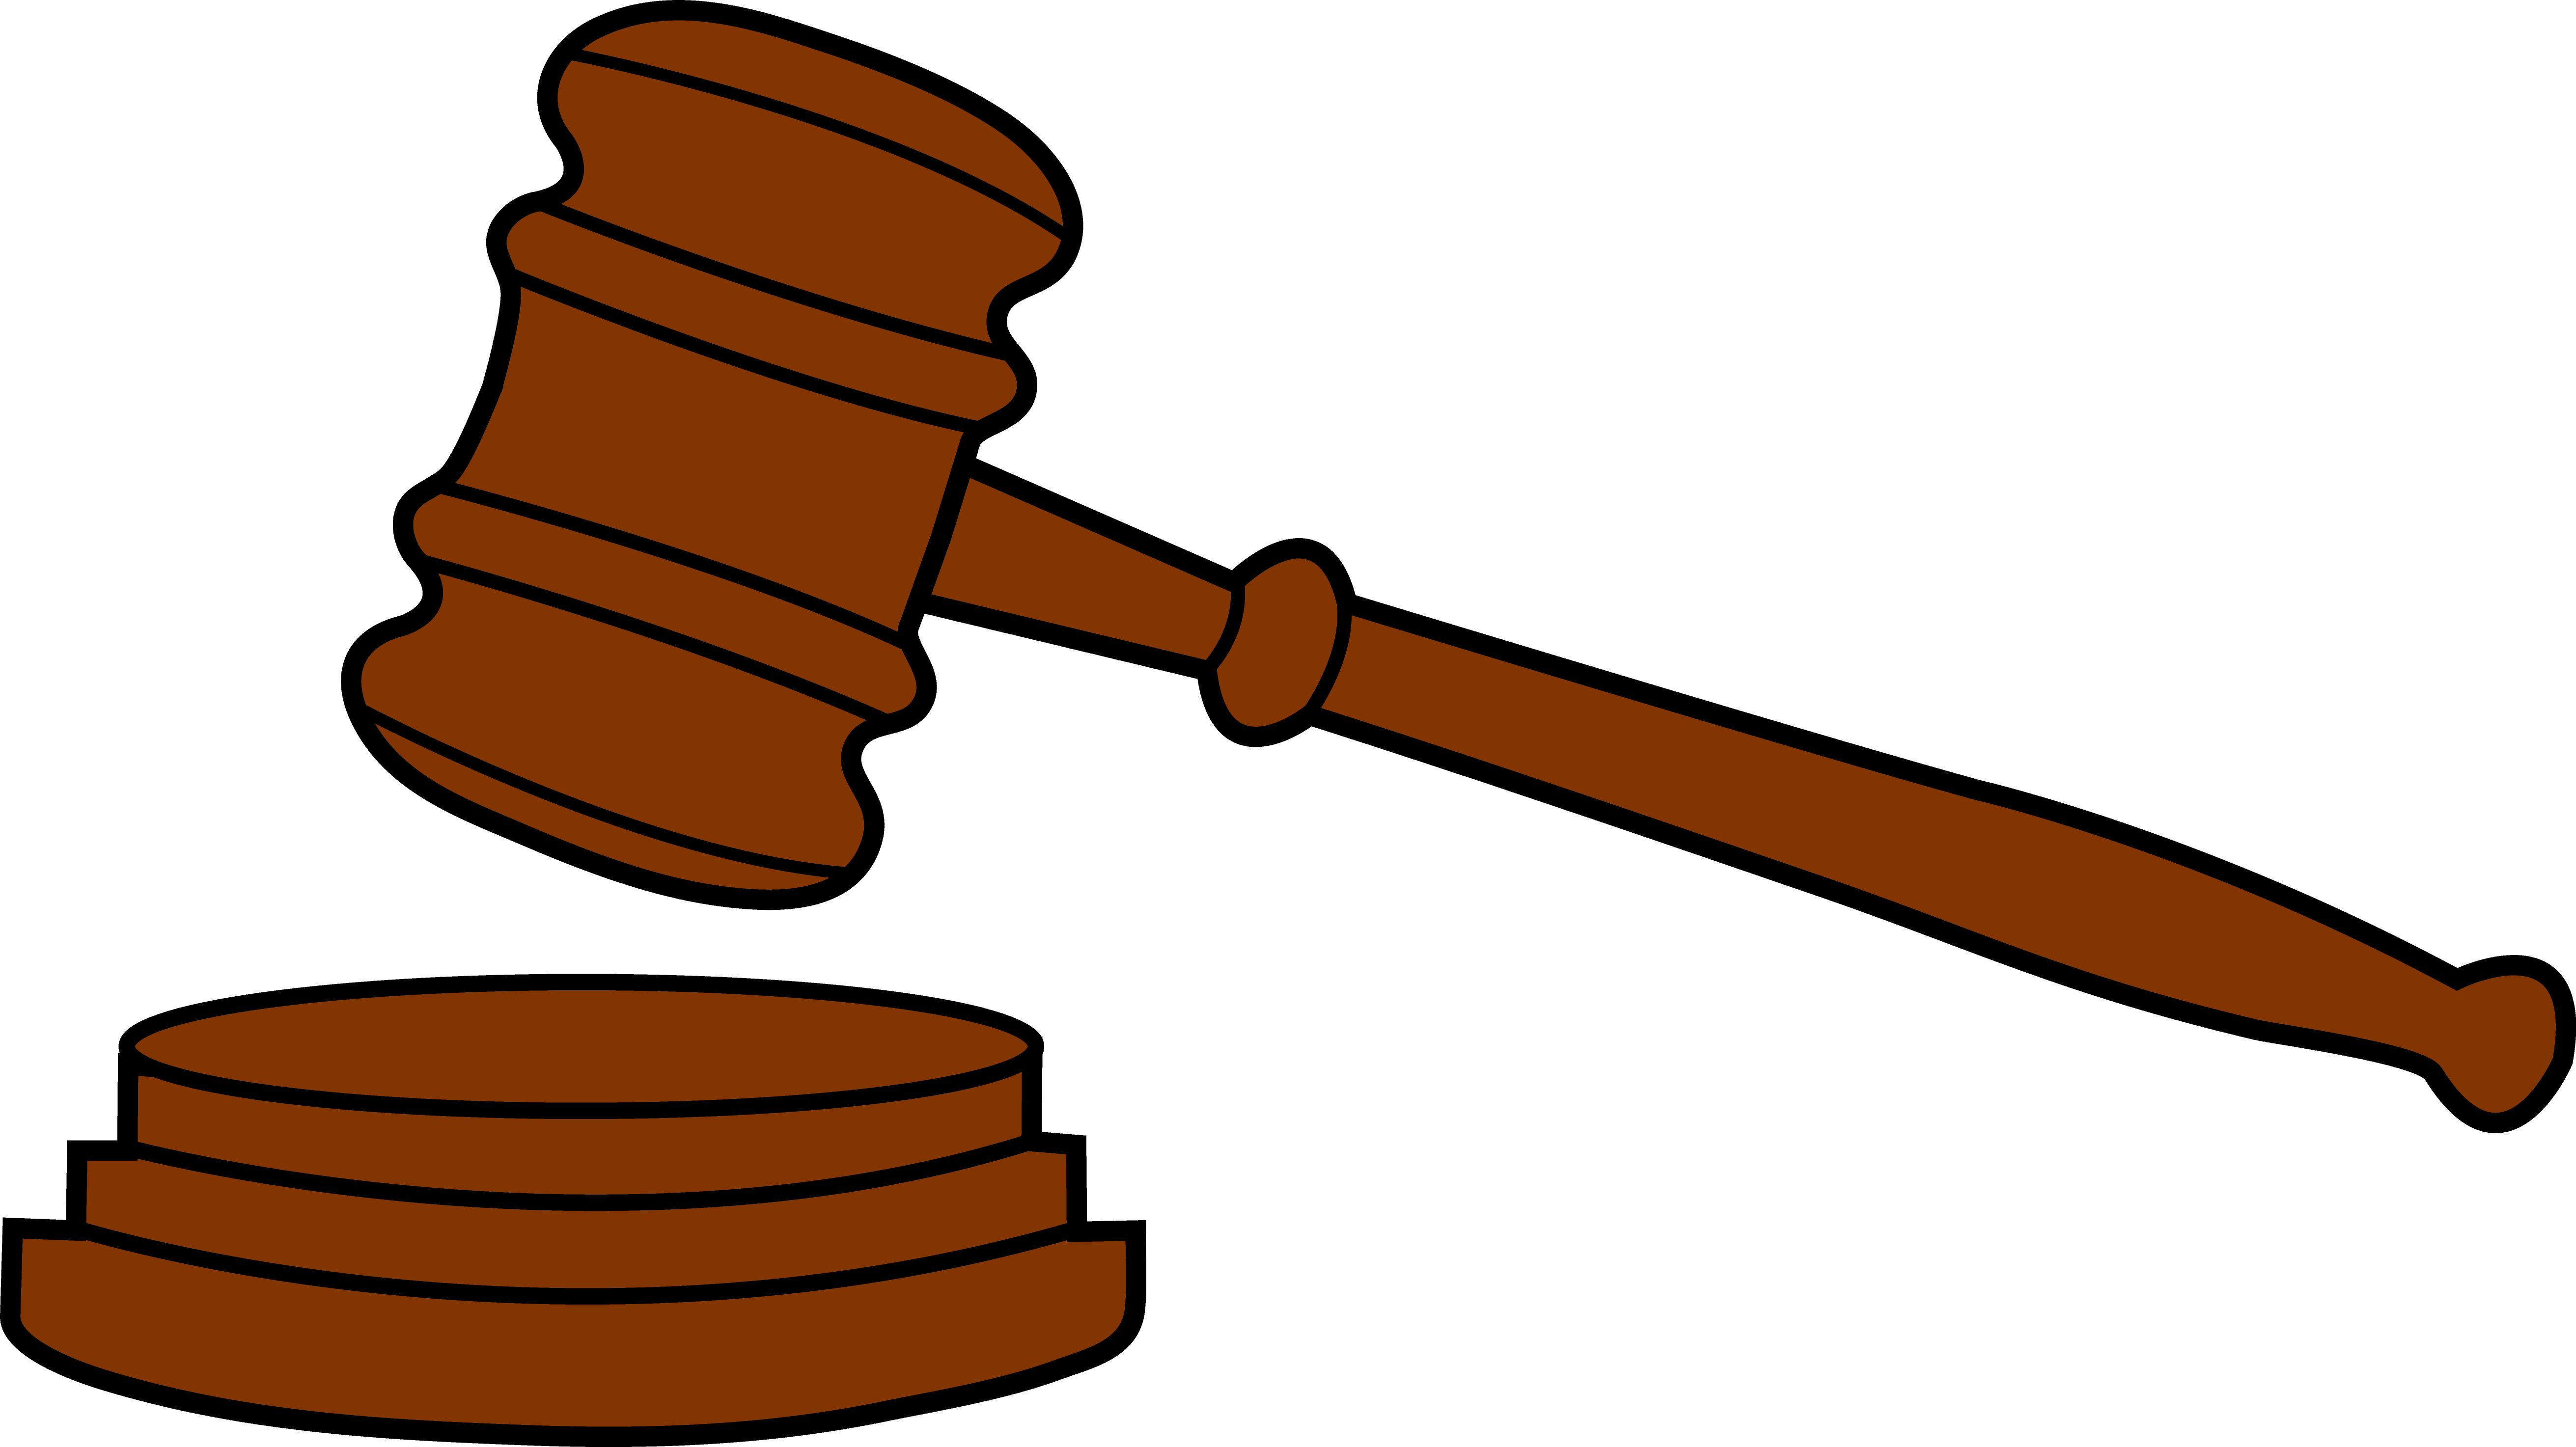 courtroom clipart - photo #20